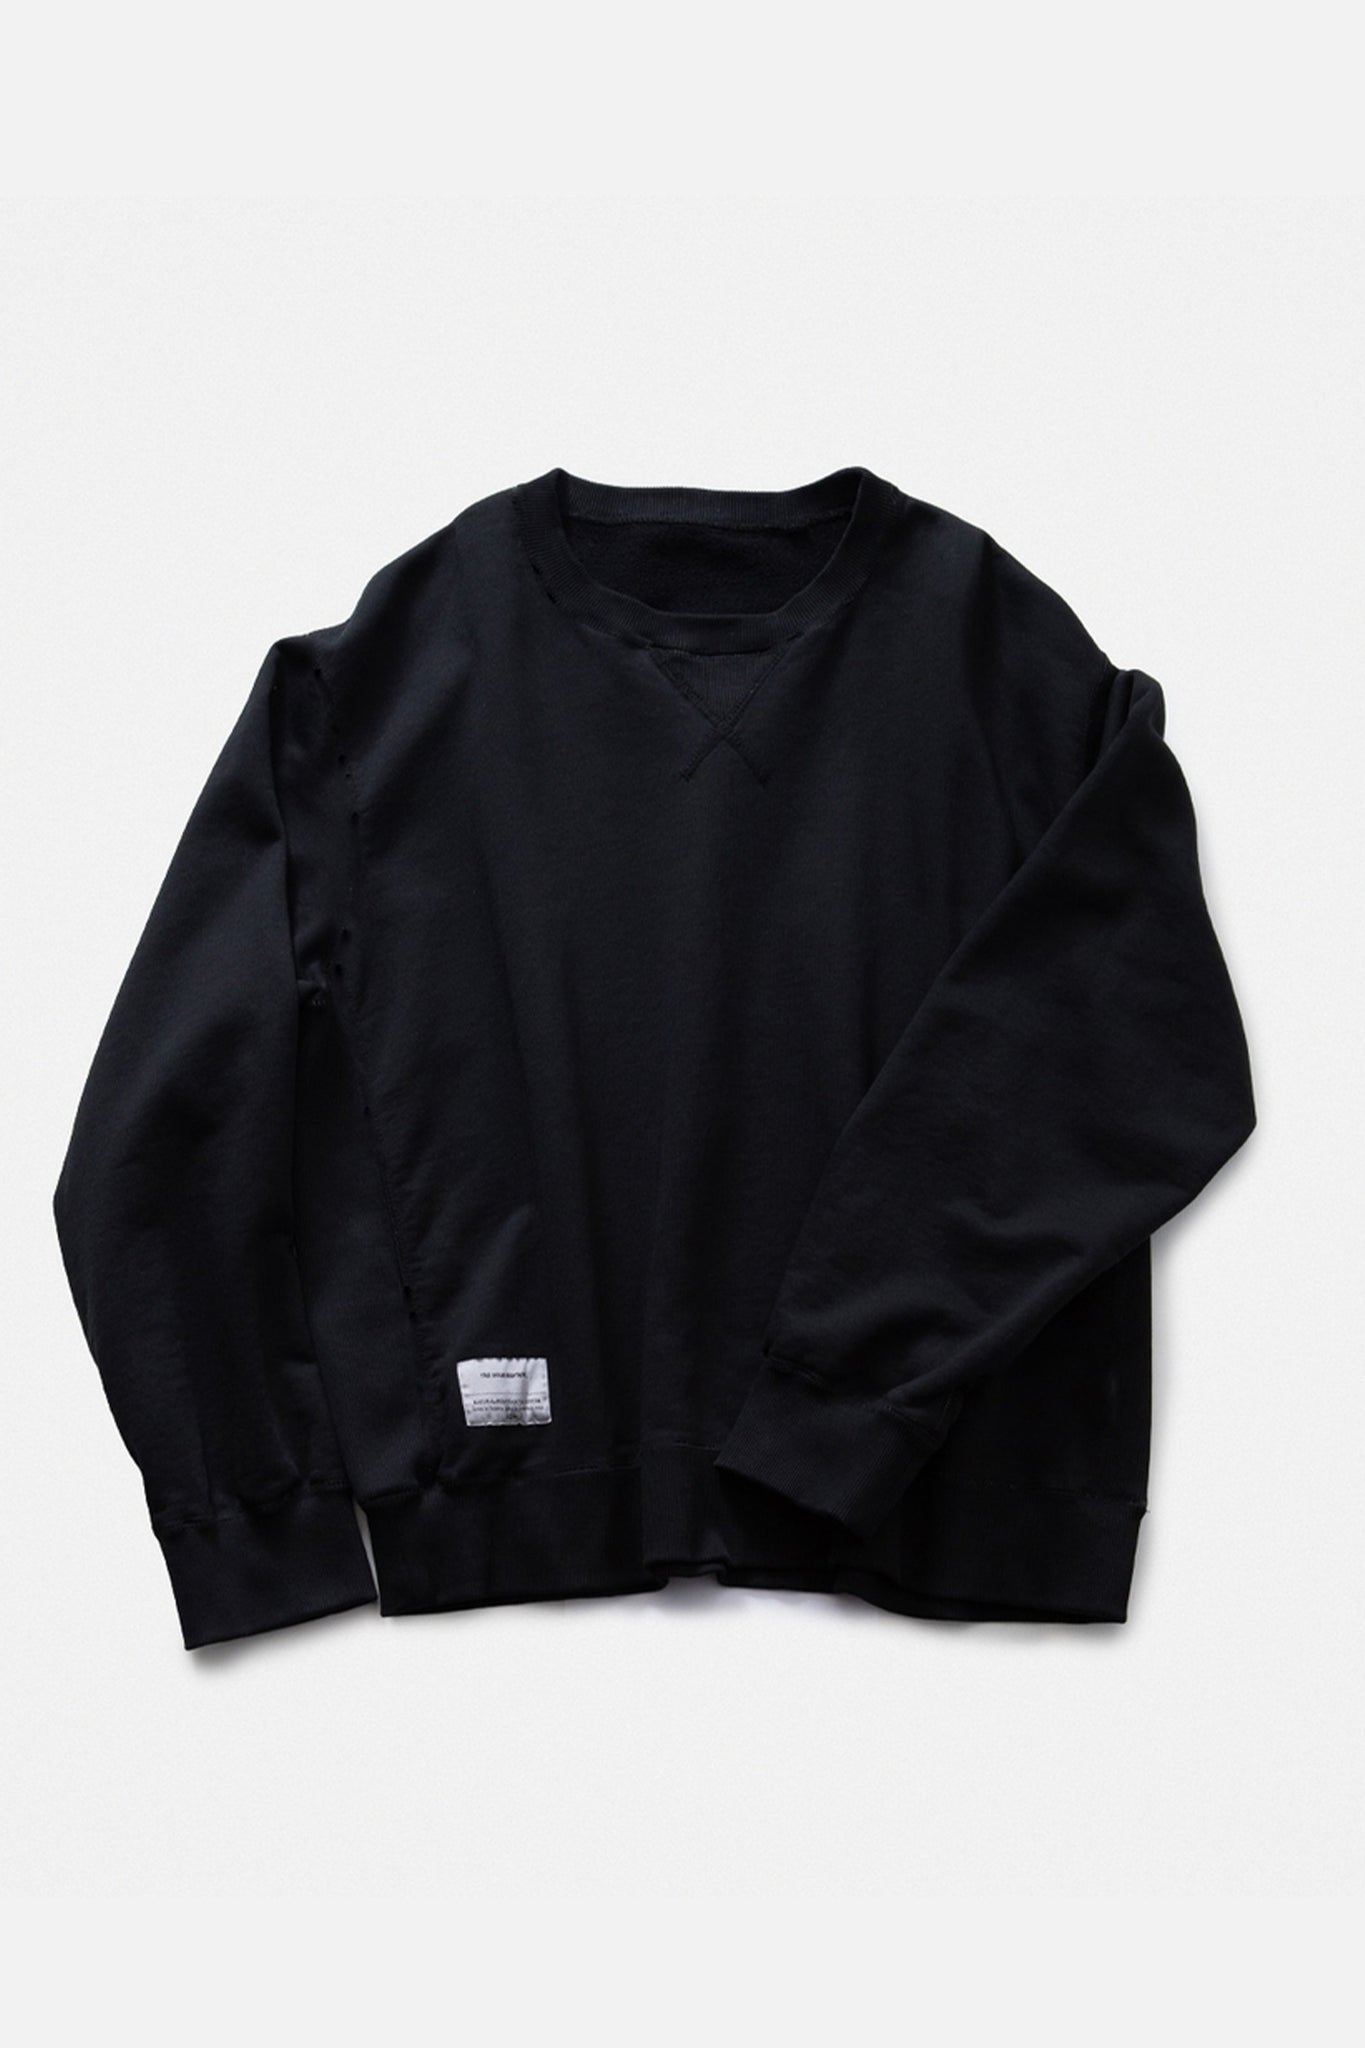 THE INOUE BROTHERS... "FRENCH TERRY SWEAT SHIRT / BLACK"